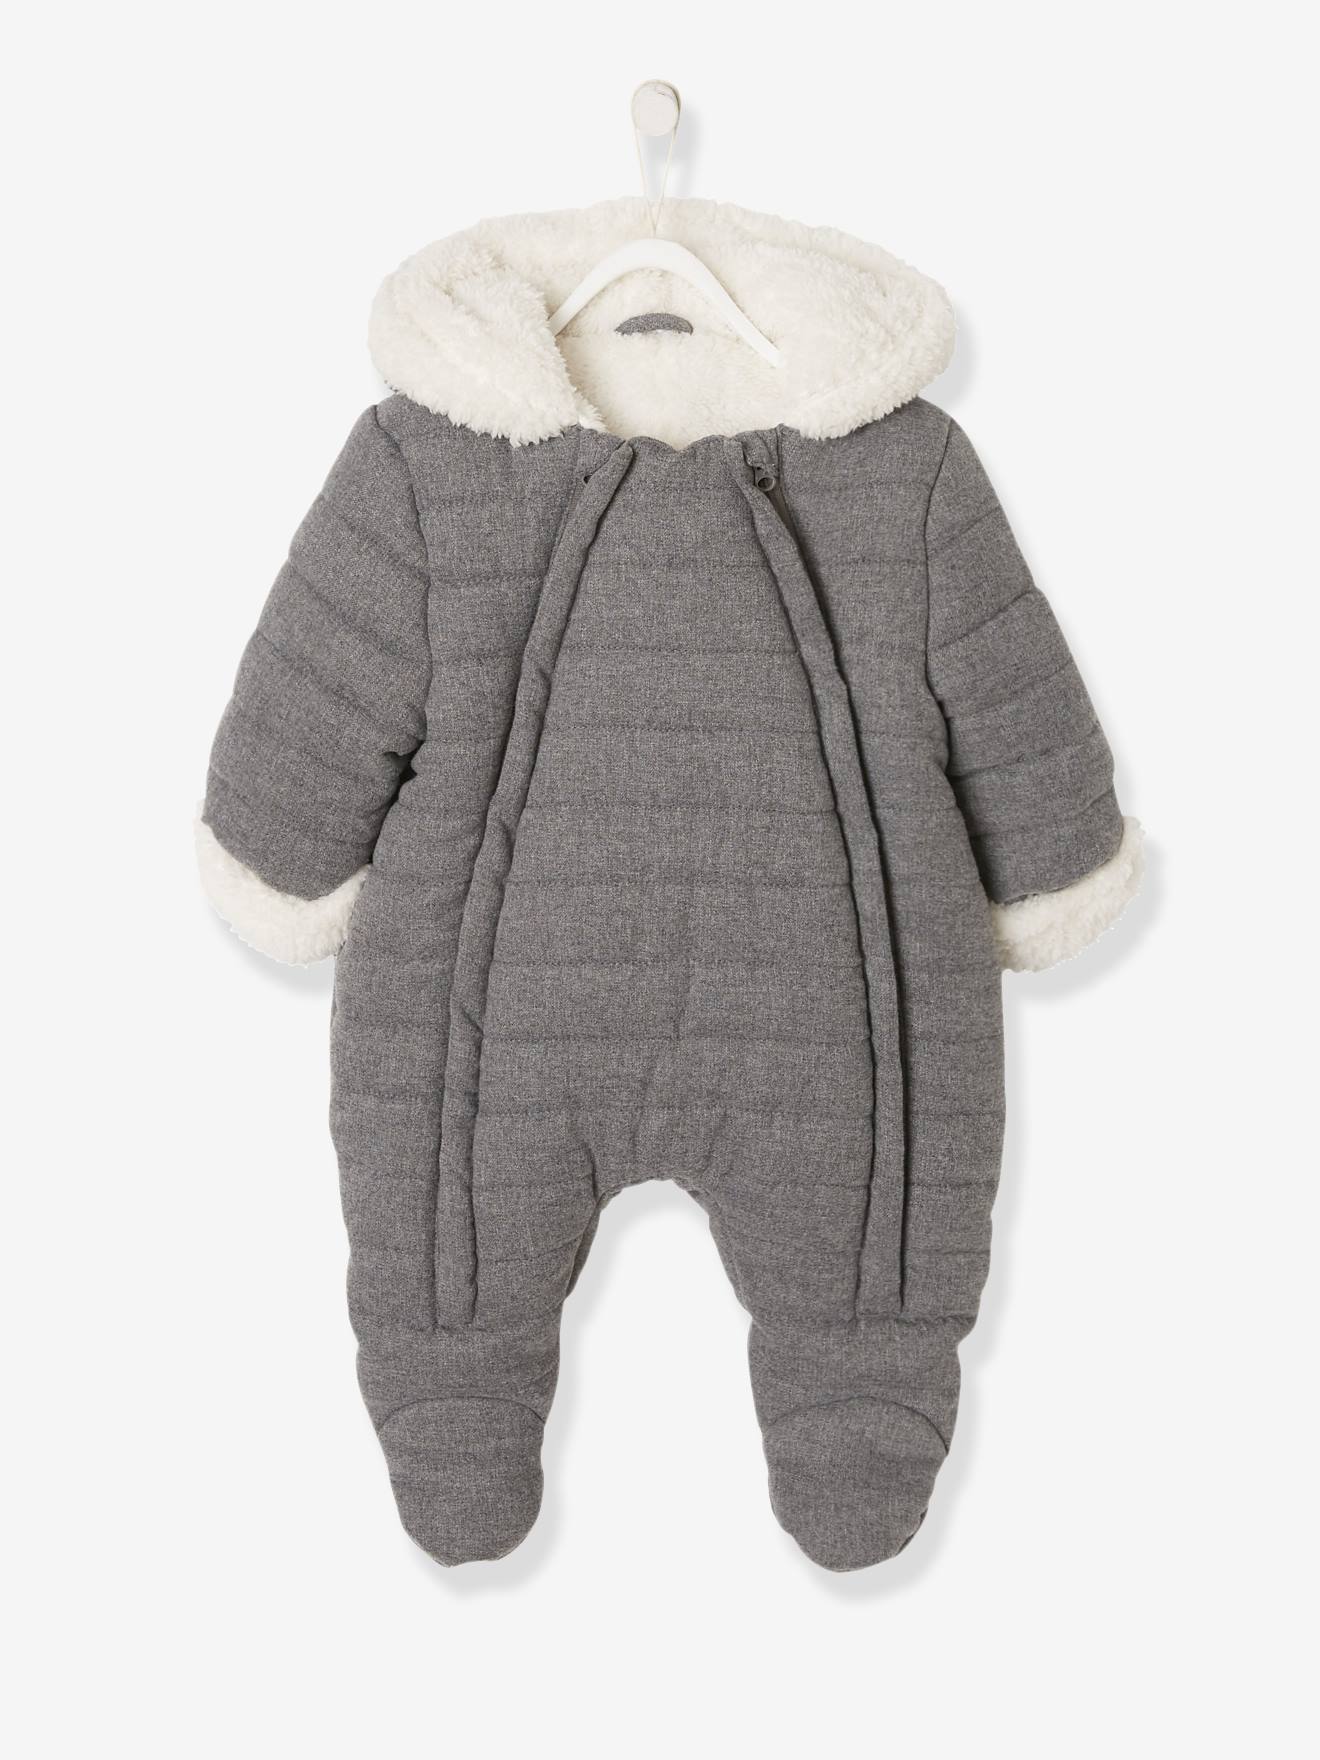 Baby Snowsuit - Snowsuit for Baby Girls 